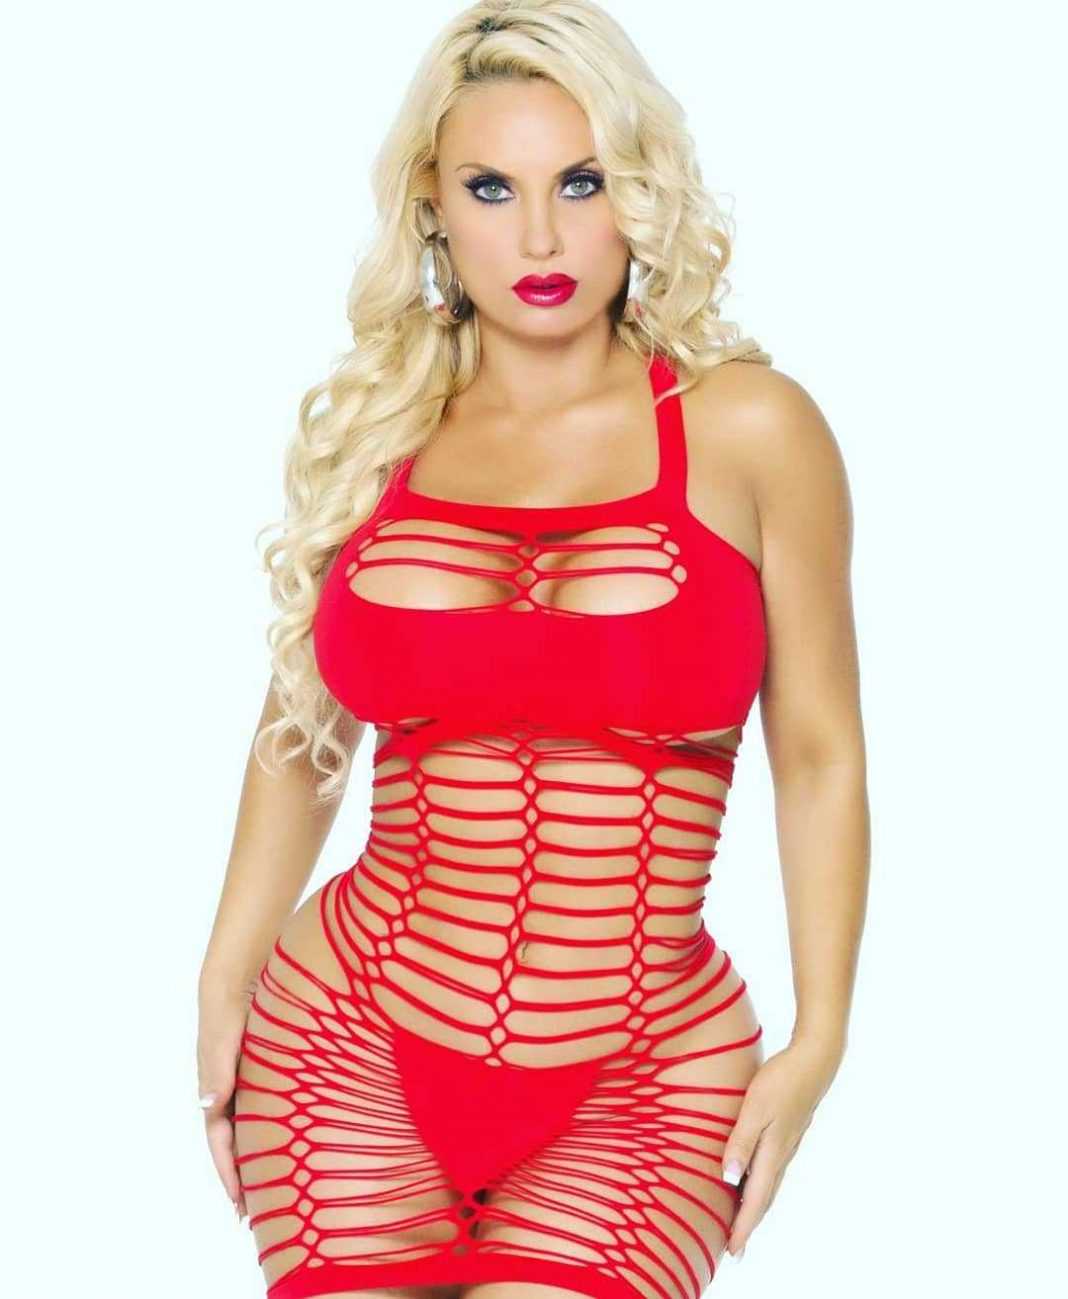 51 Coco Austin Nude Pictures Uncover Her Attractive Physique | Best Of Comic Books